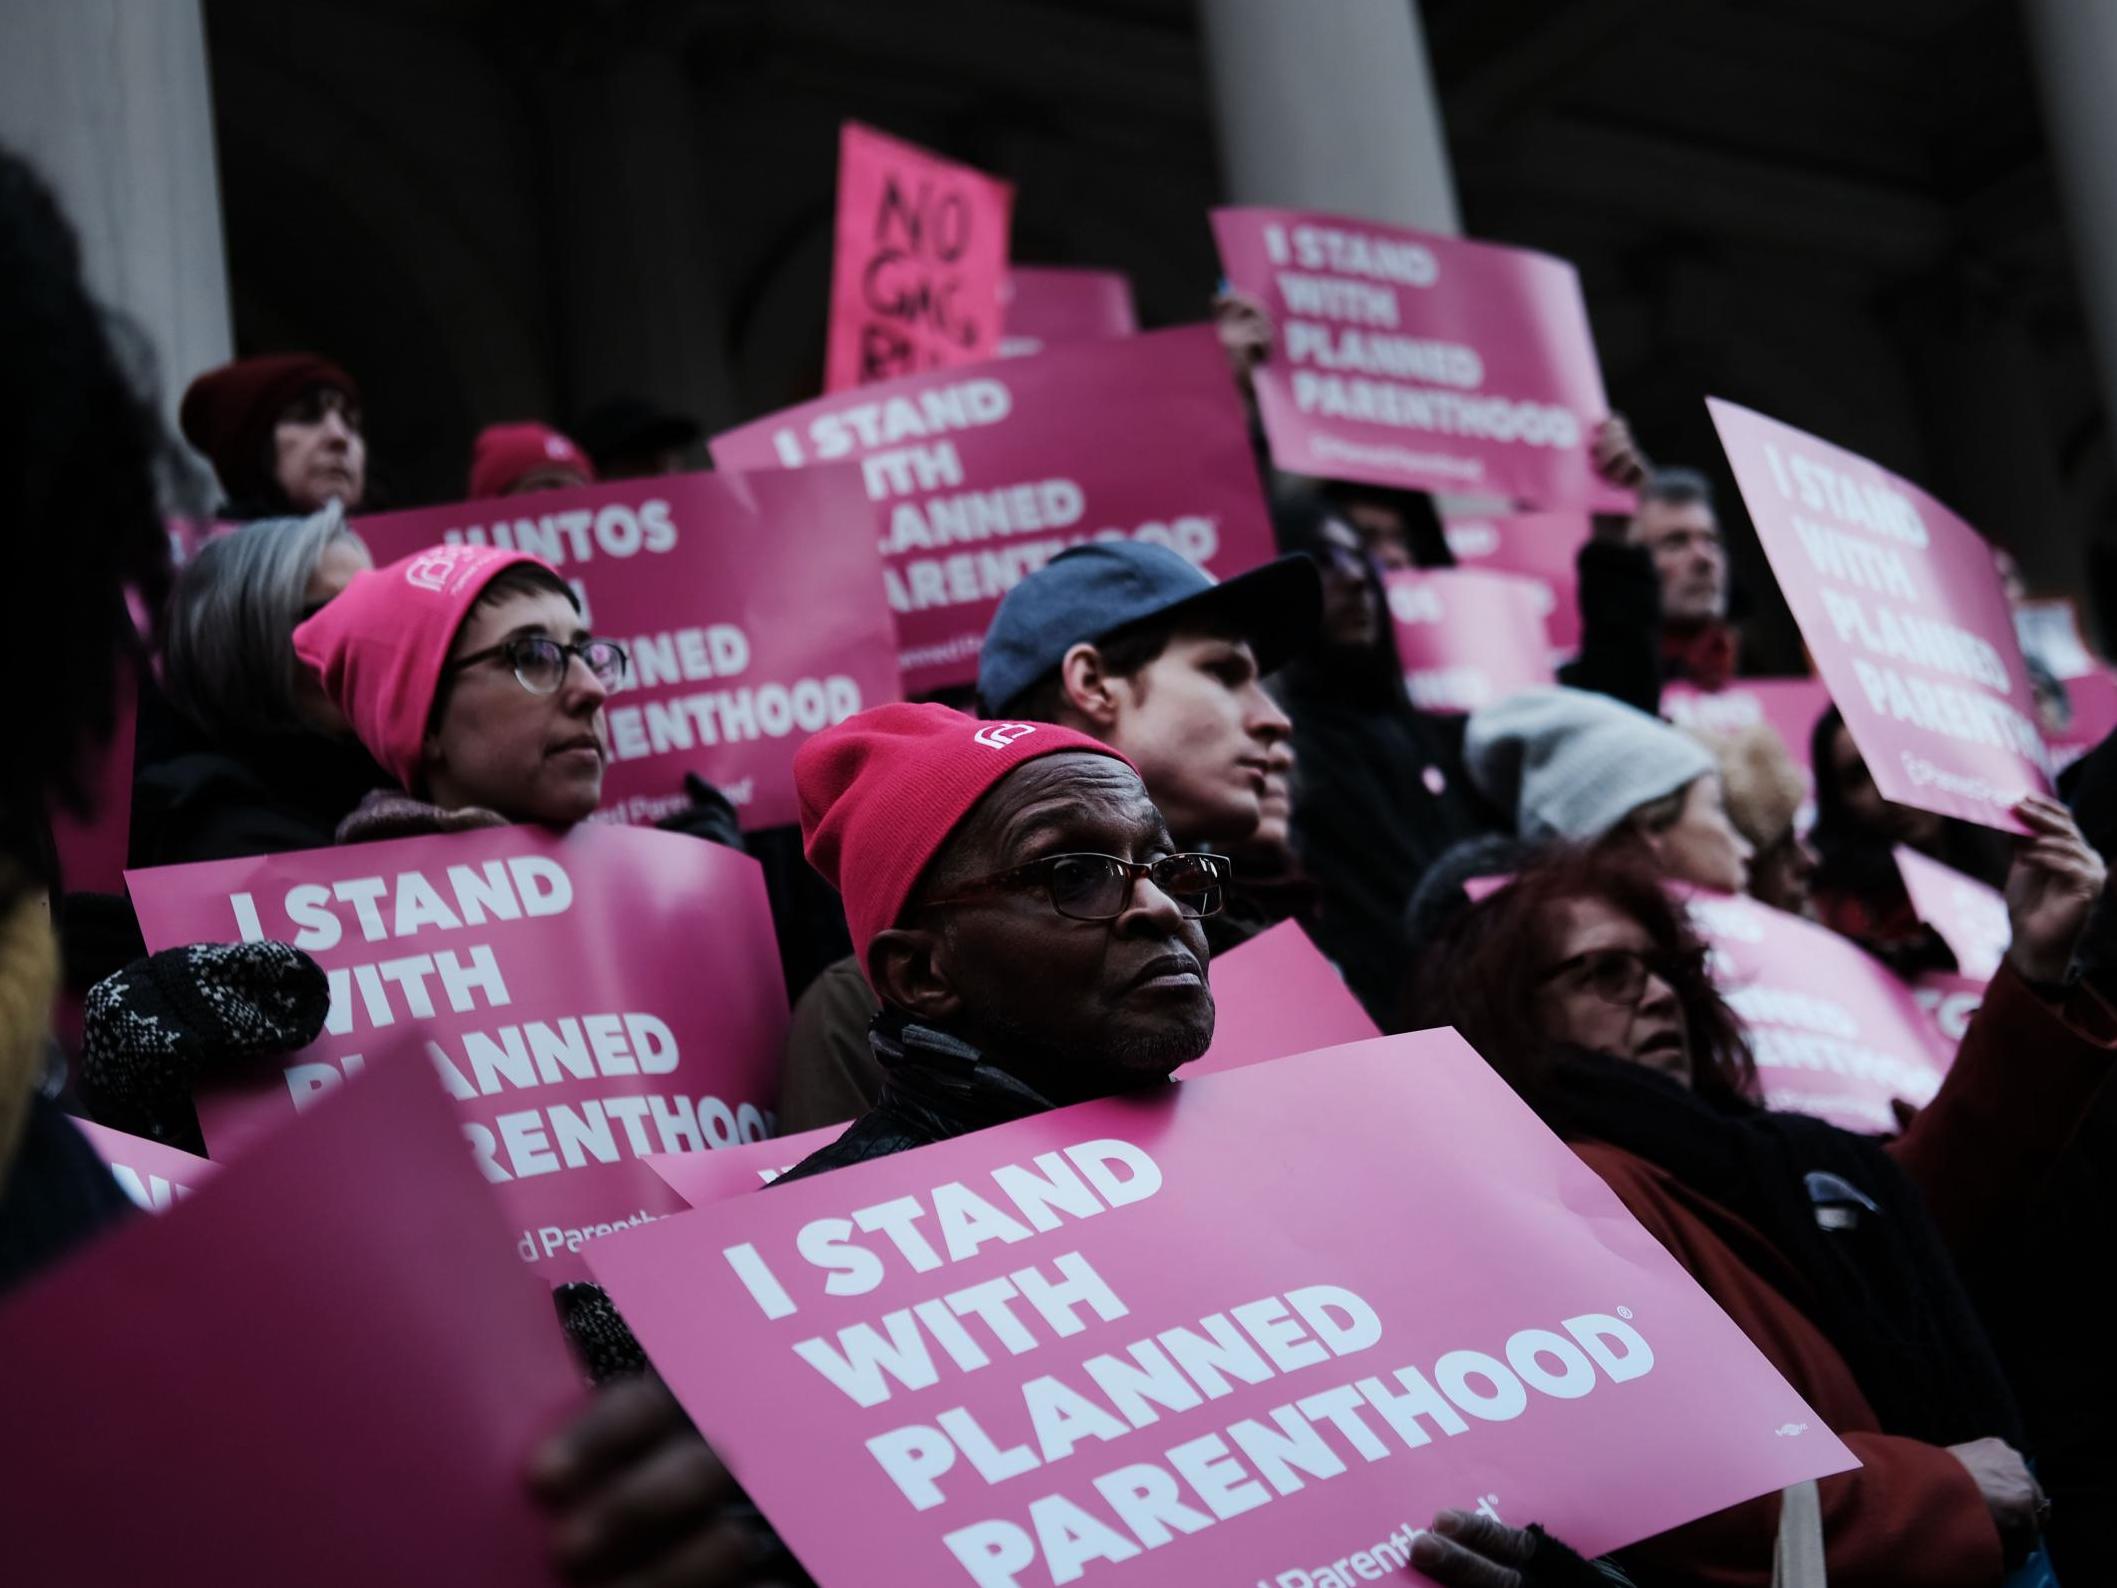 Pro-choice activists, politicians and others associated with Planned Parenthood gather against the Trump administration's title X rule change in February in New York City